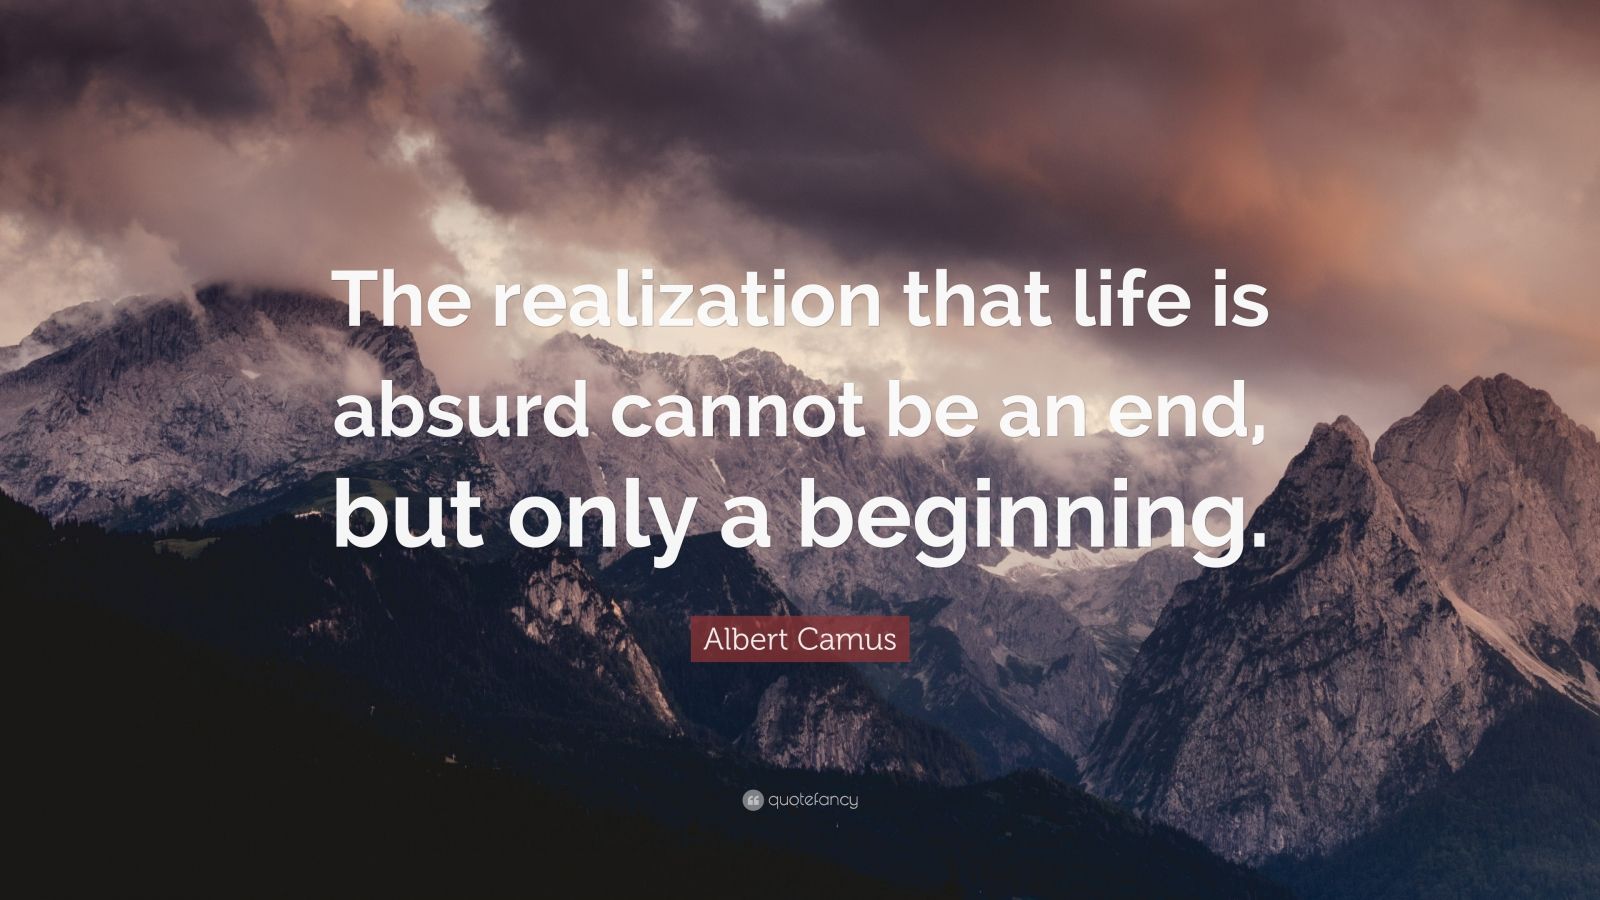 4697399 Albert Camus Quote The realization that life is absurd cannot be